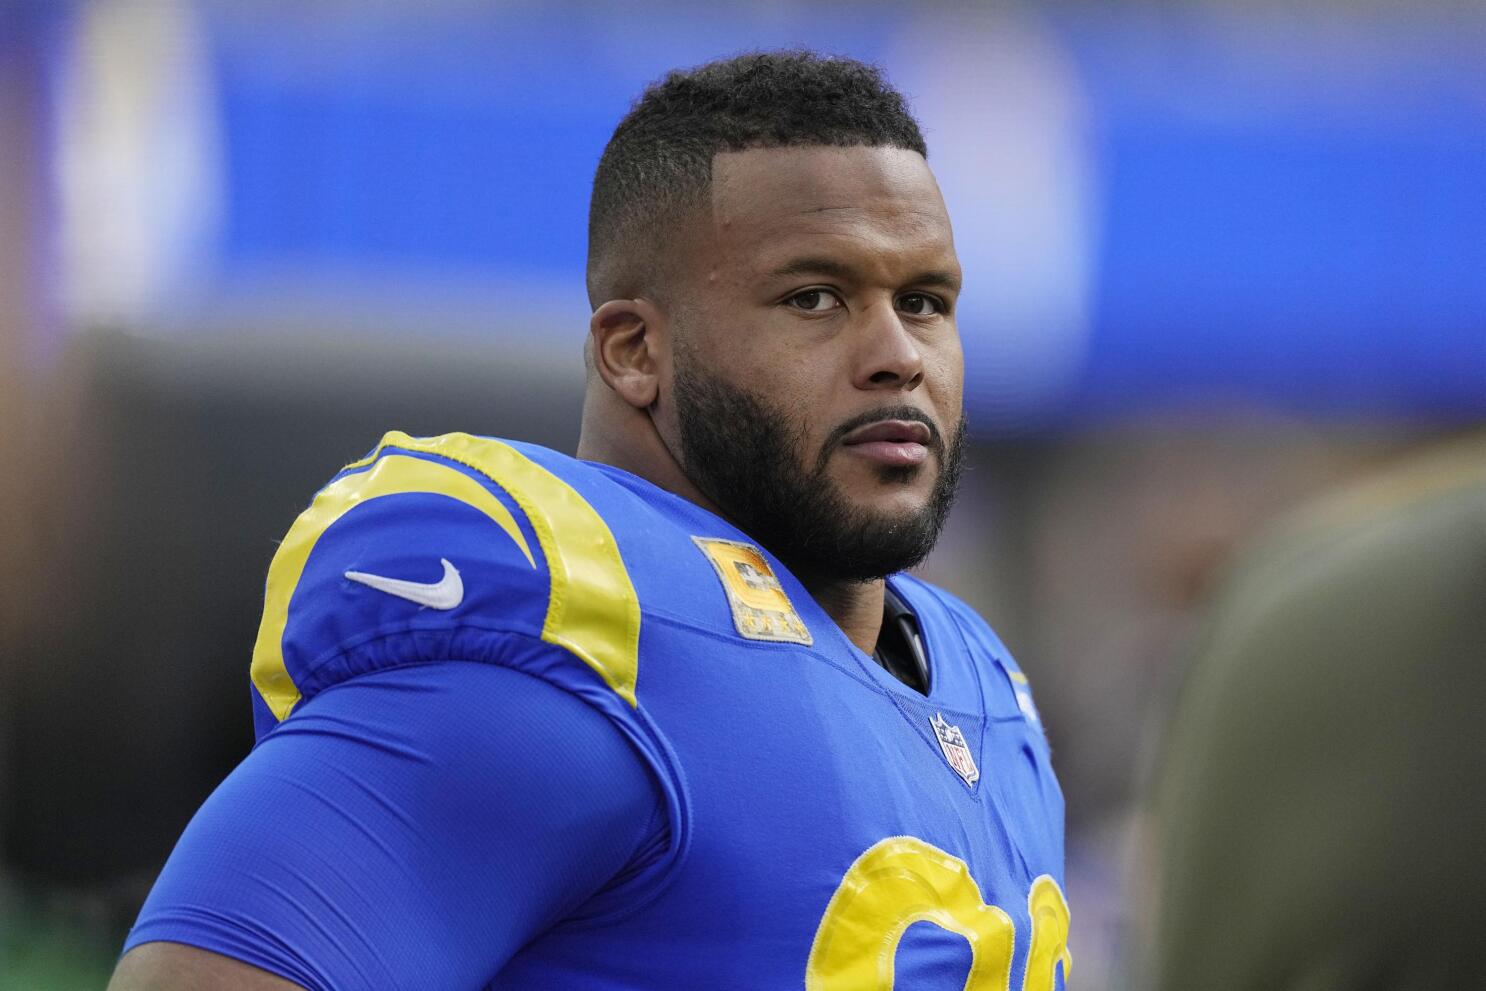 Aaron Donald unlikely to return this season, McVay says